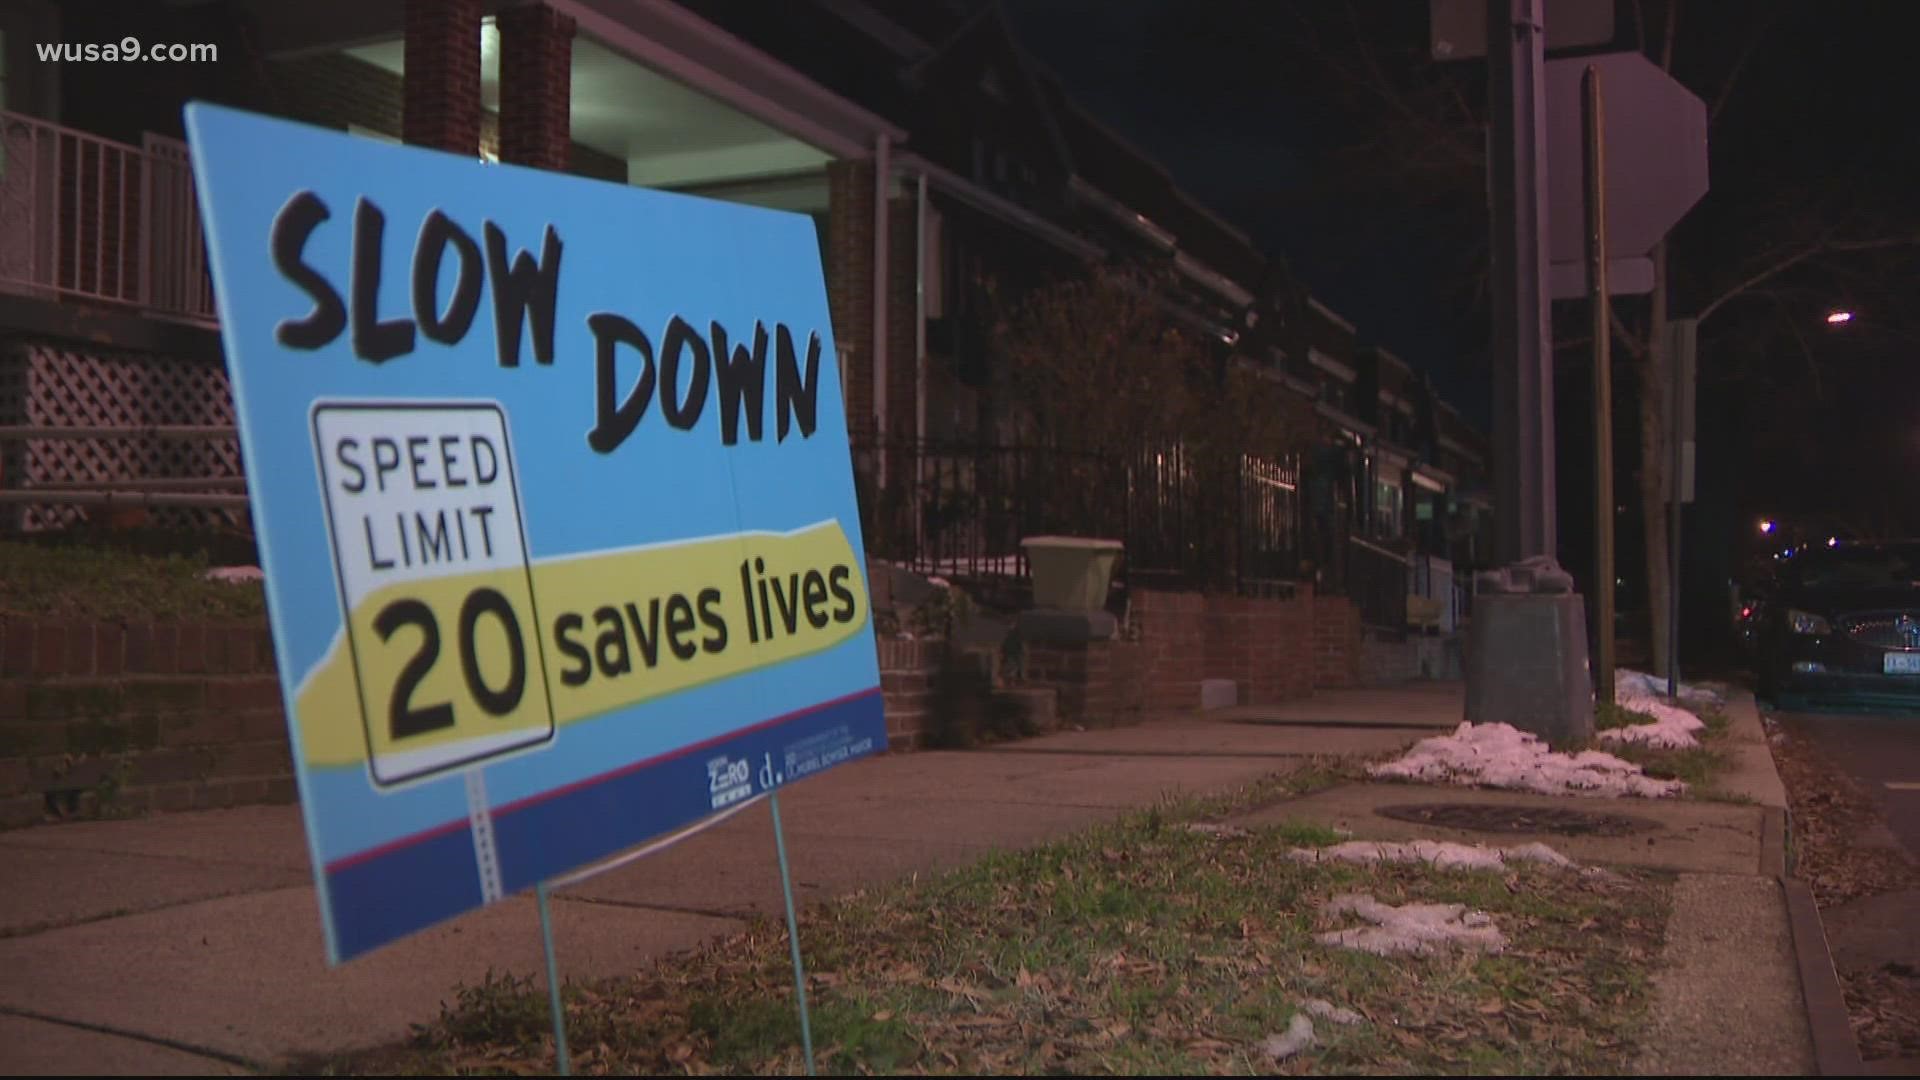 One month after a 9-year-old boy was hit by a car, neighbors say little has been done to try to improve safety in the area.